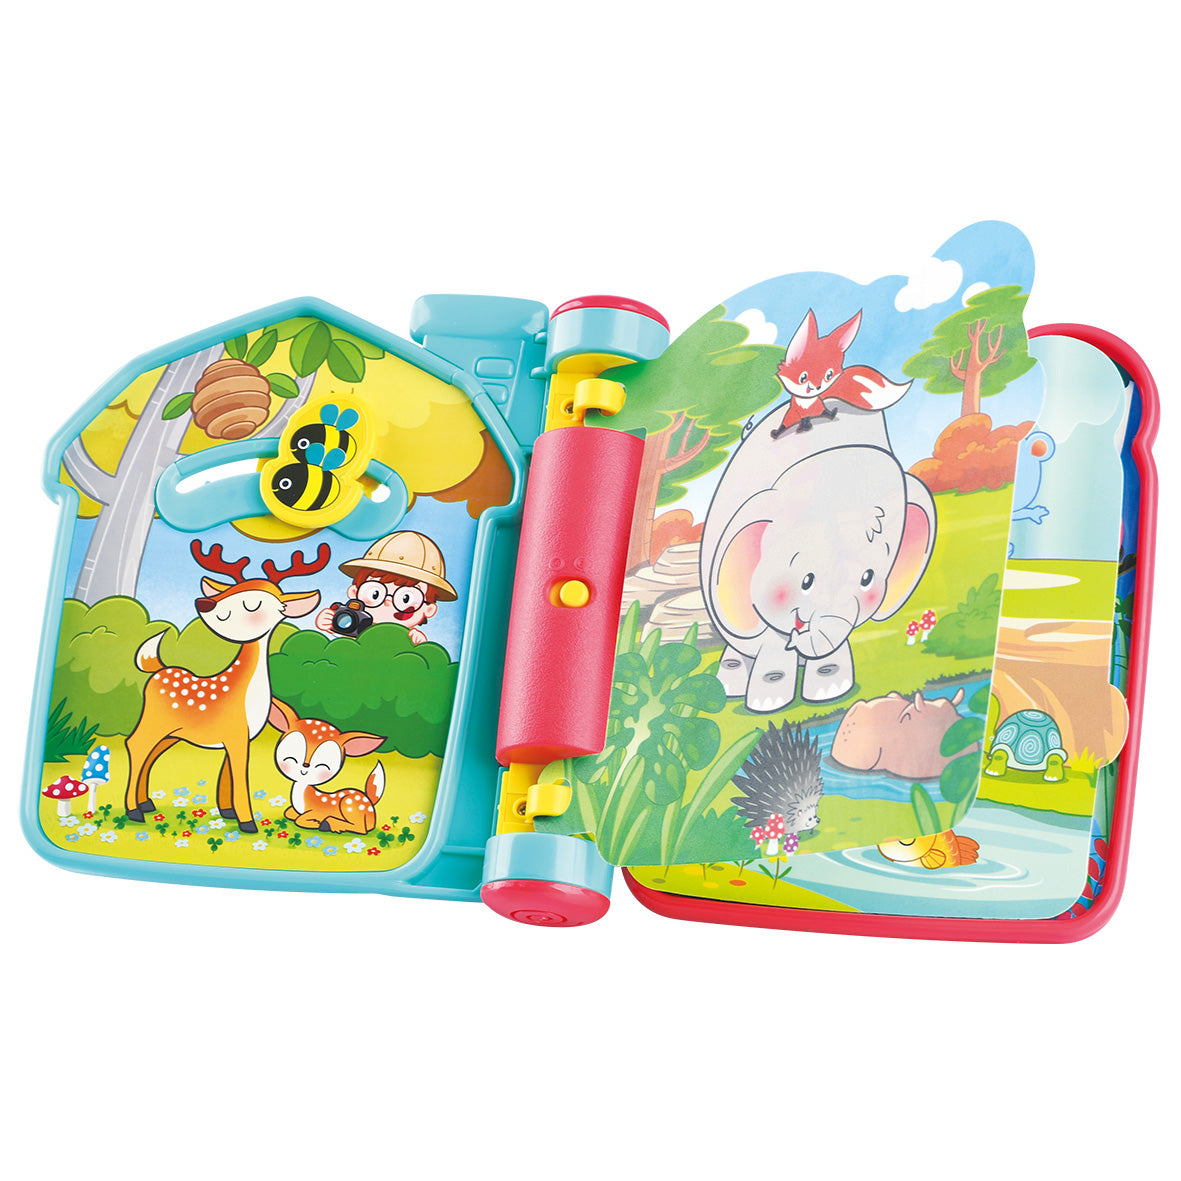 PlayGo Music Play Book Toy for Kids